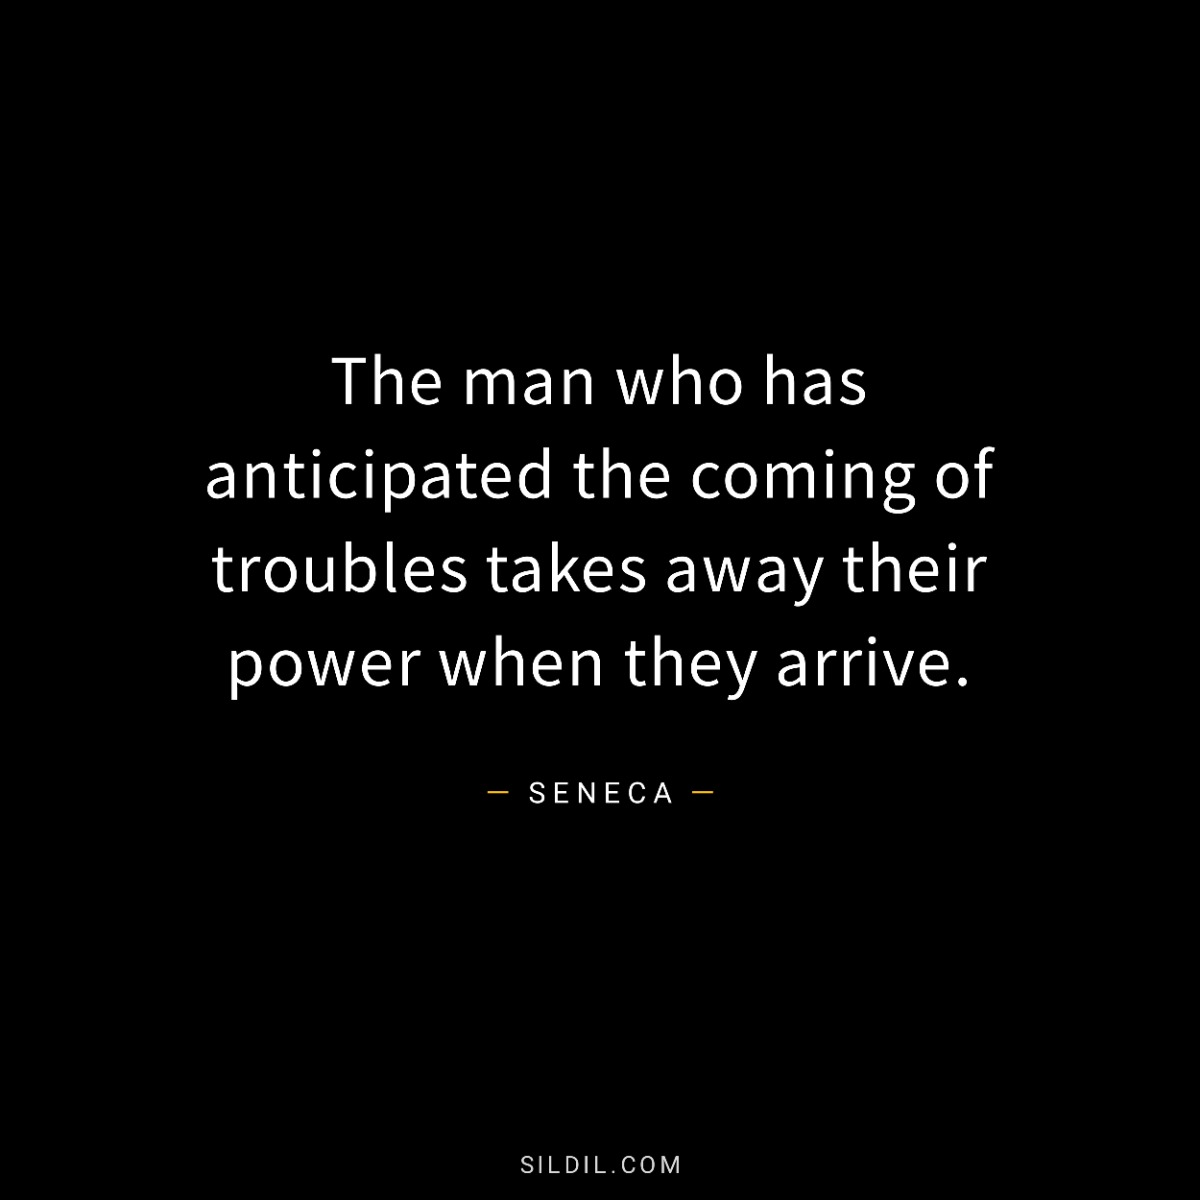 The man who has anticipated the coming of troubles takes away their power when they arrive.